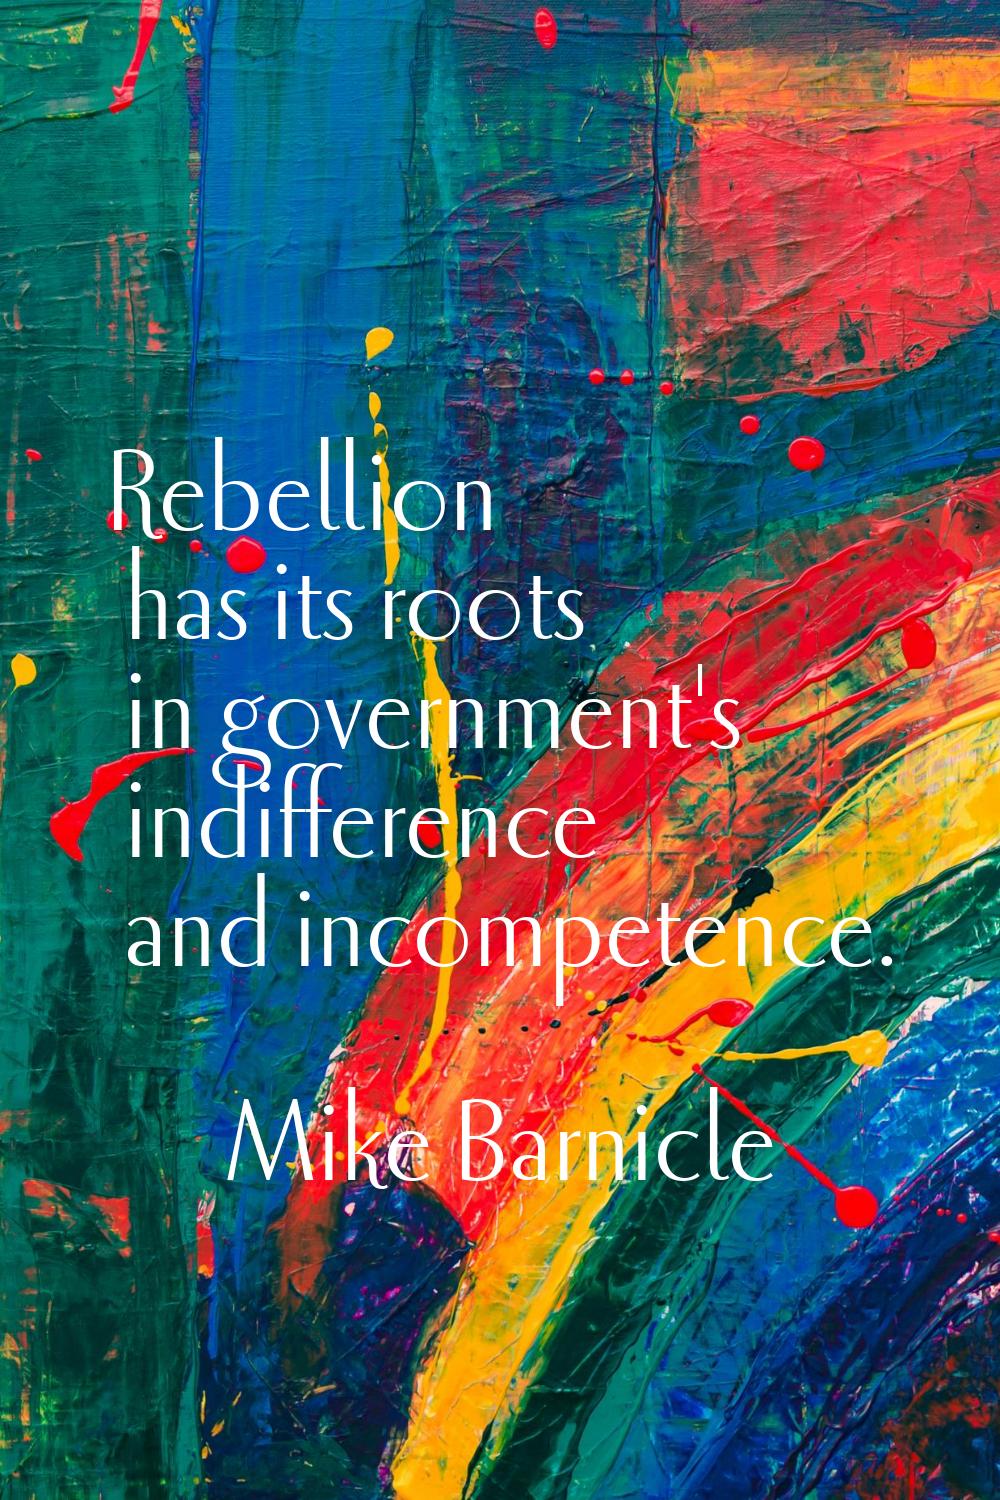 Rebellion has its roots in government's indifference and incompetence.